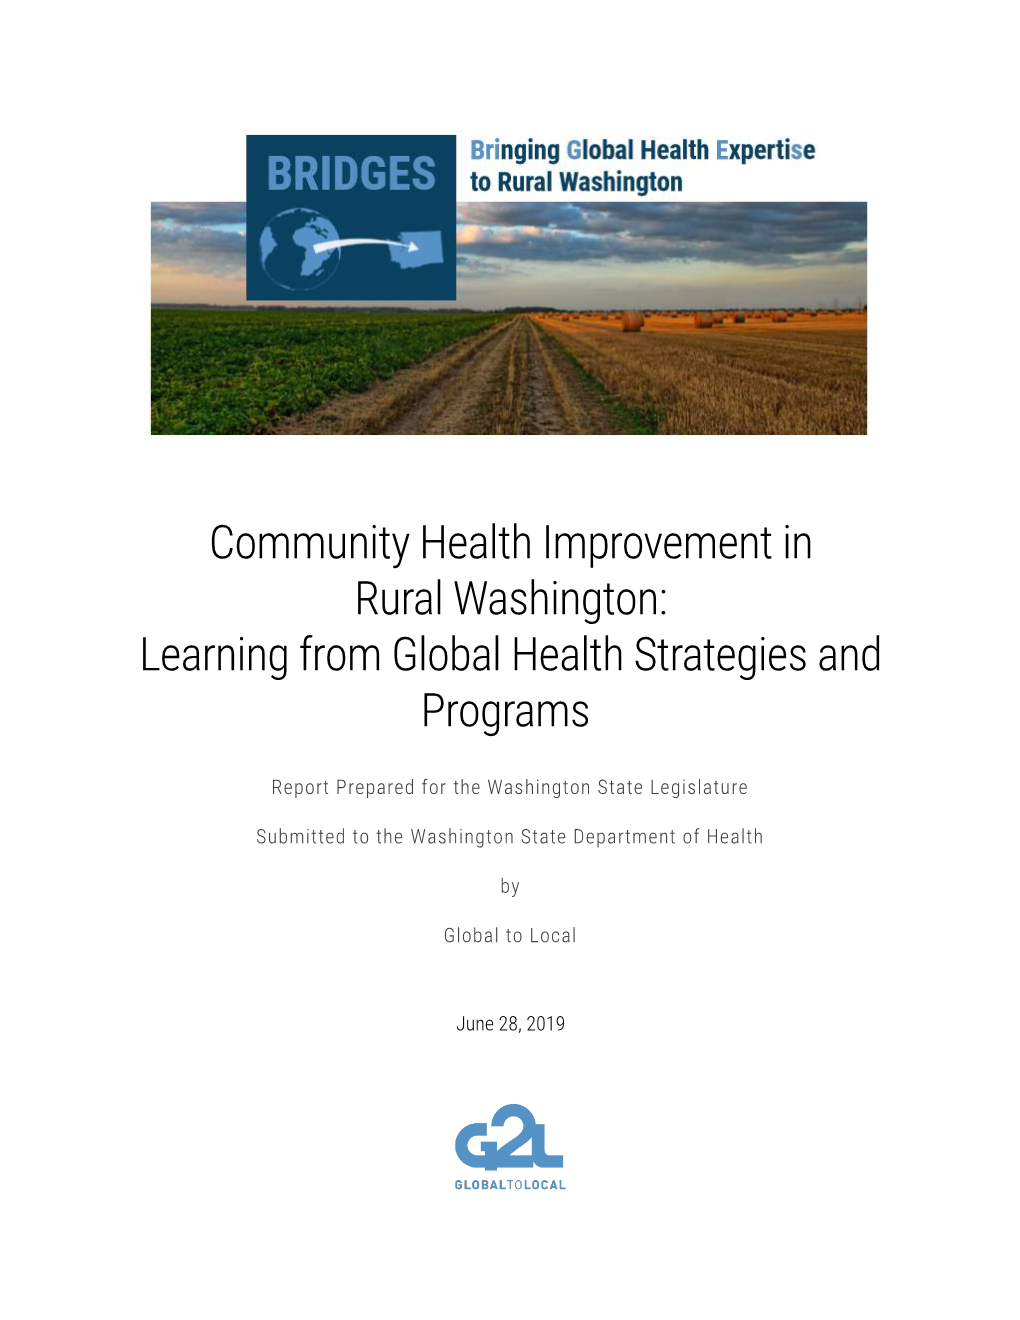 Community Health Improvement in Rural Washington: Learning from Global Health Strategies and Programs